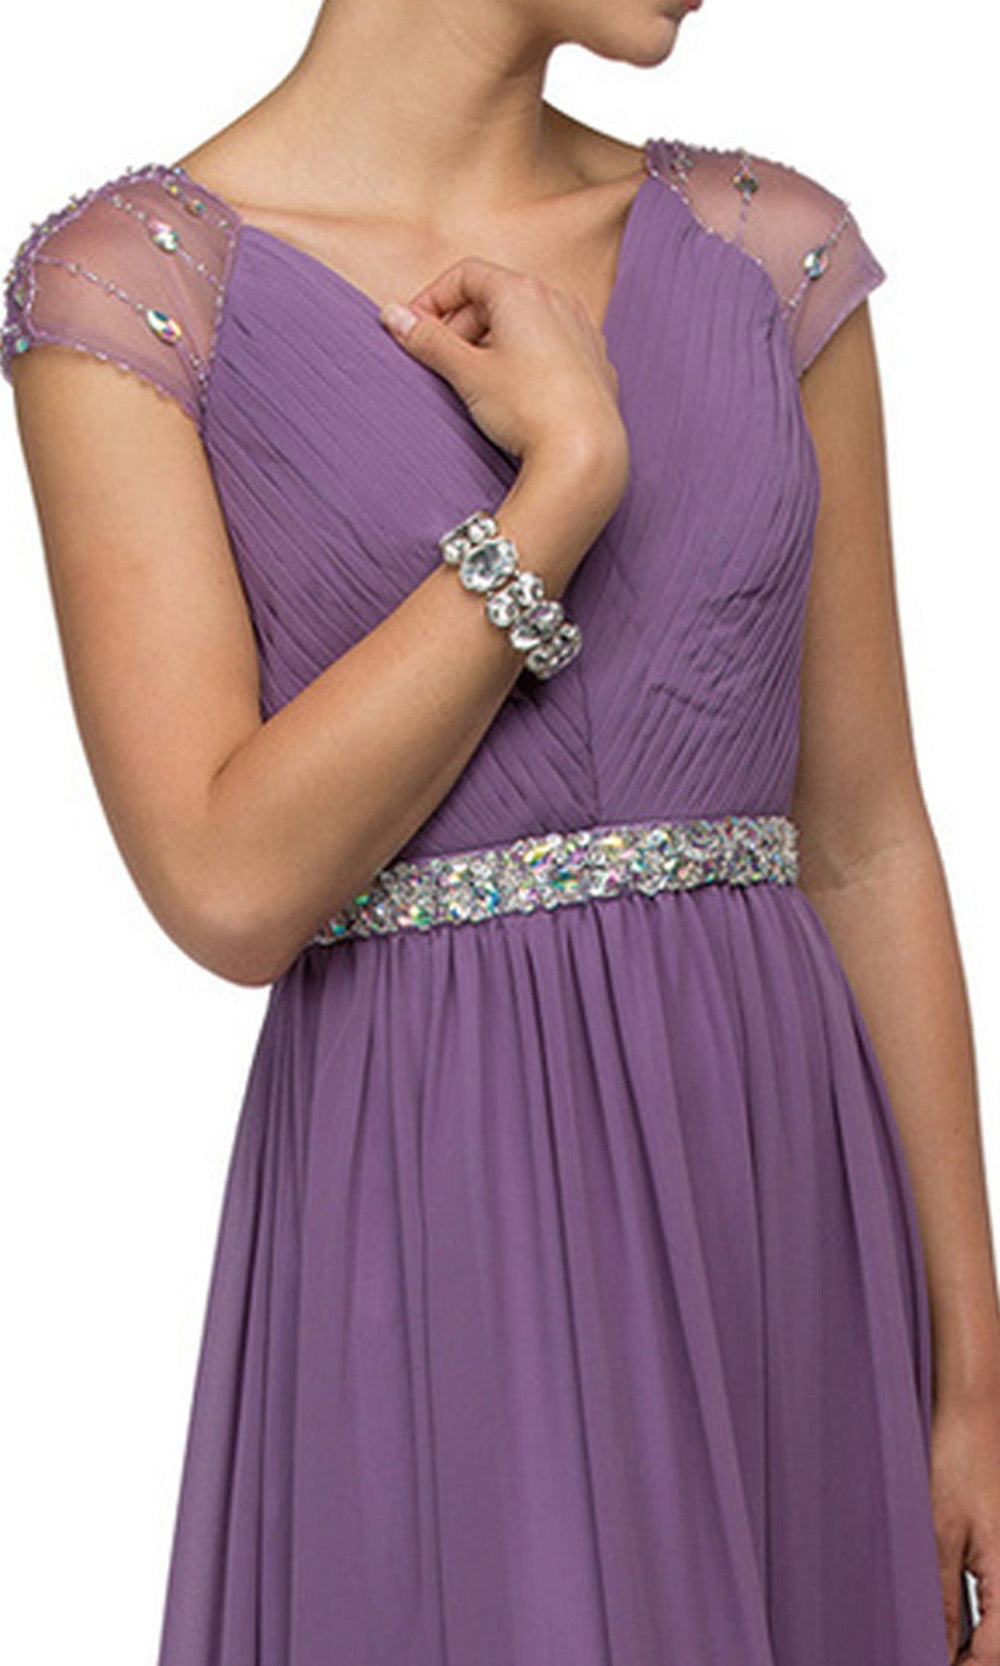 Dancing Queen Illusion Cap Sleeve Pleated V-Neck Chiffon Evening Dress 9182 CCSALE S / Dusty Lilac